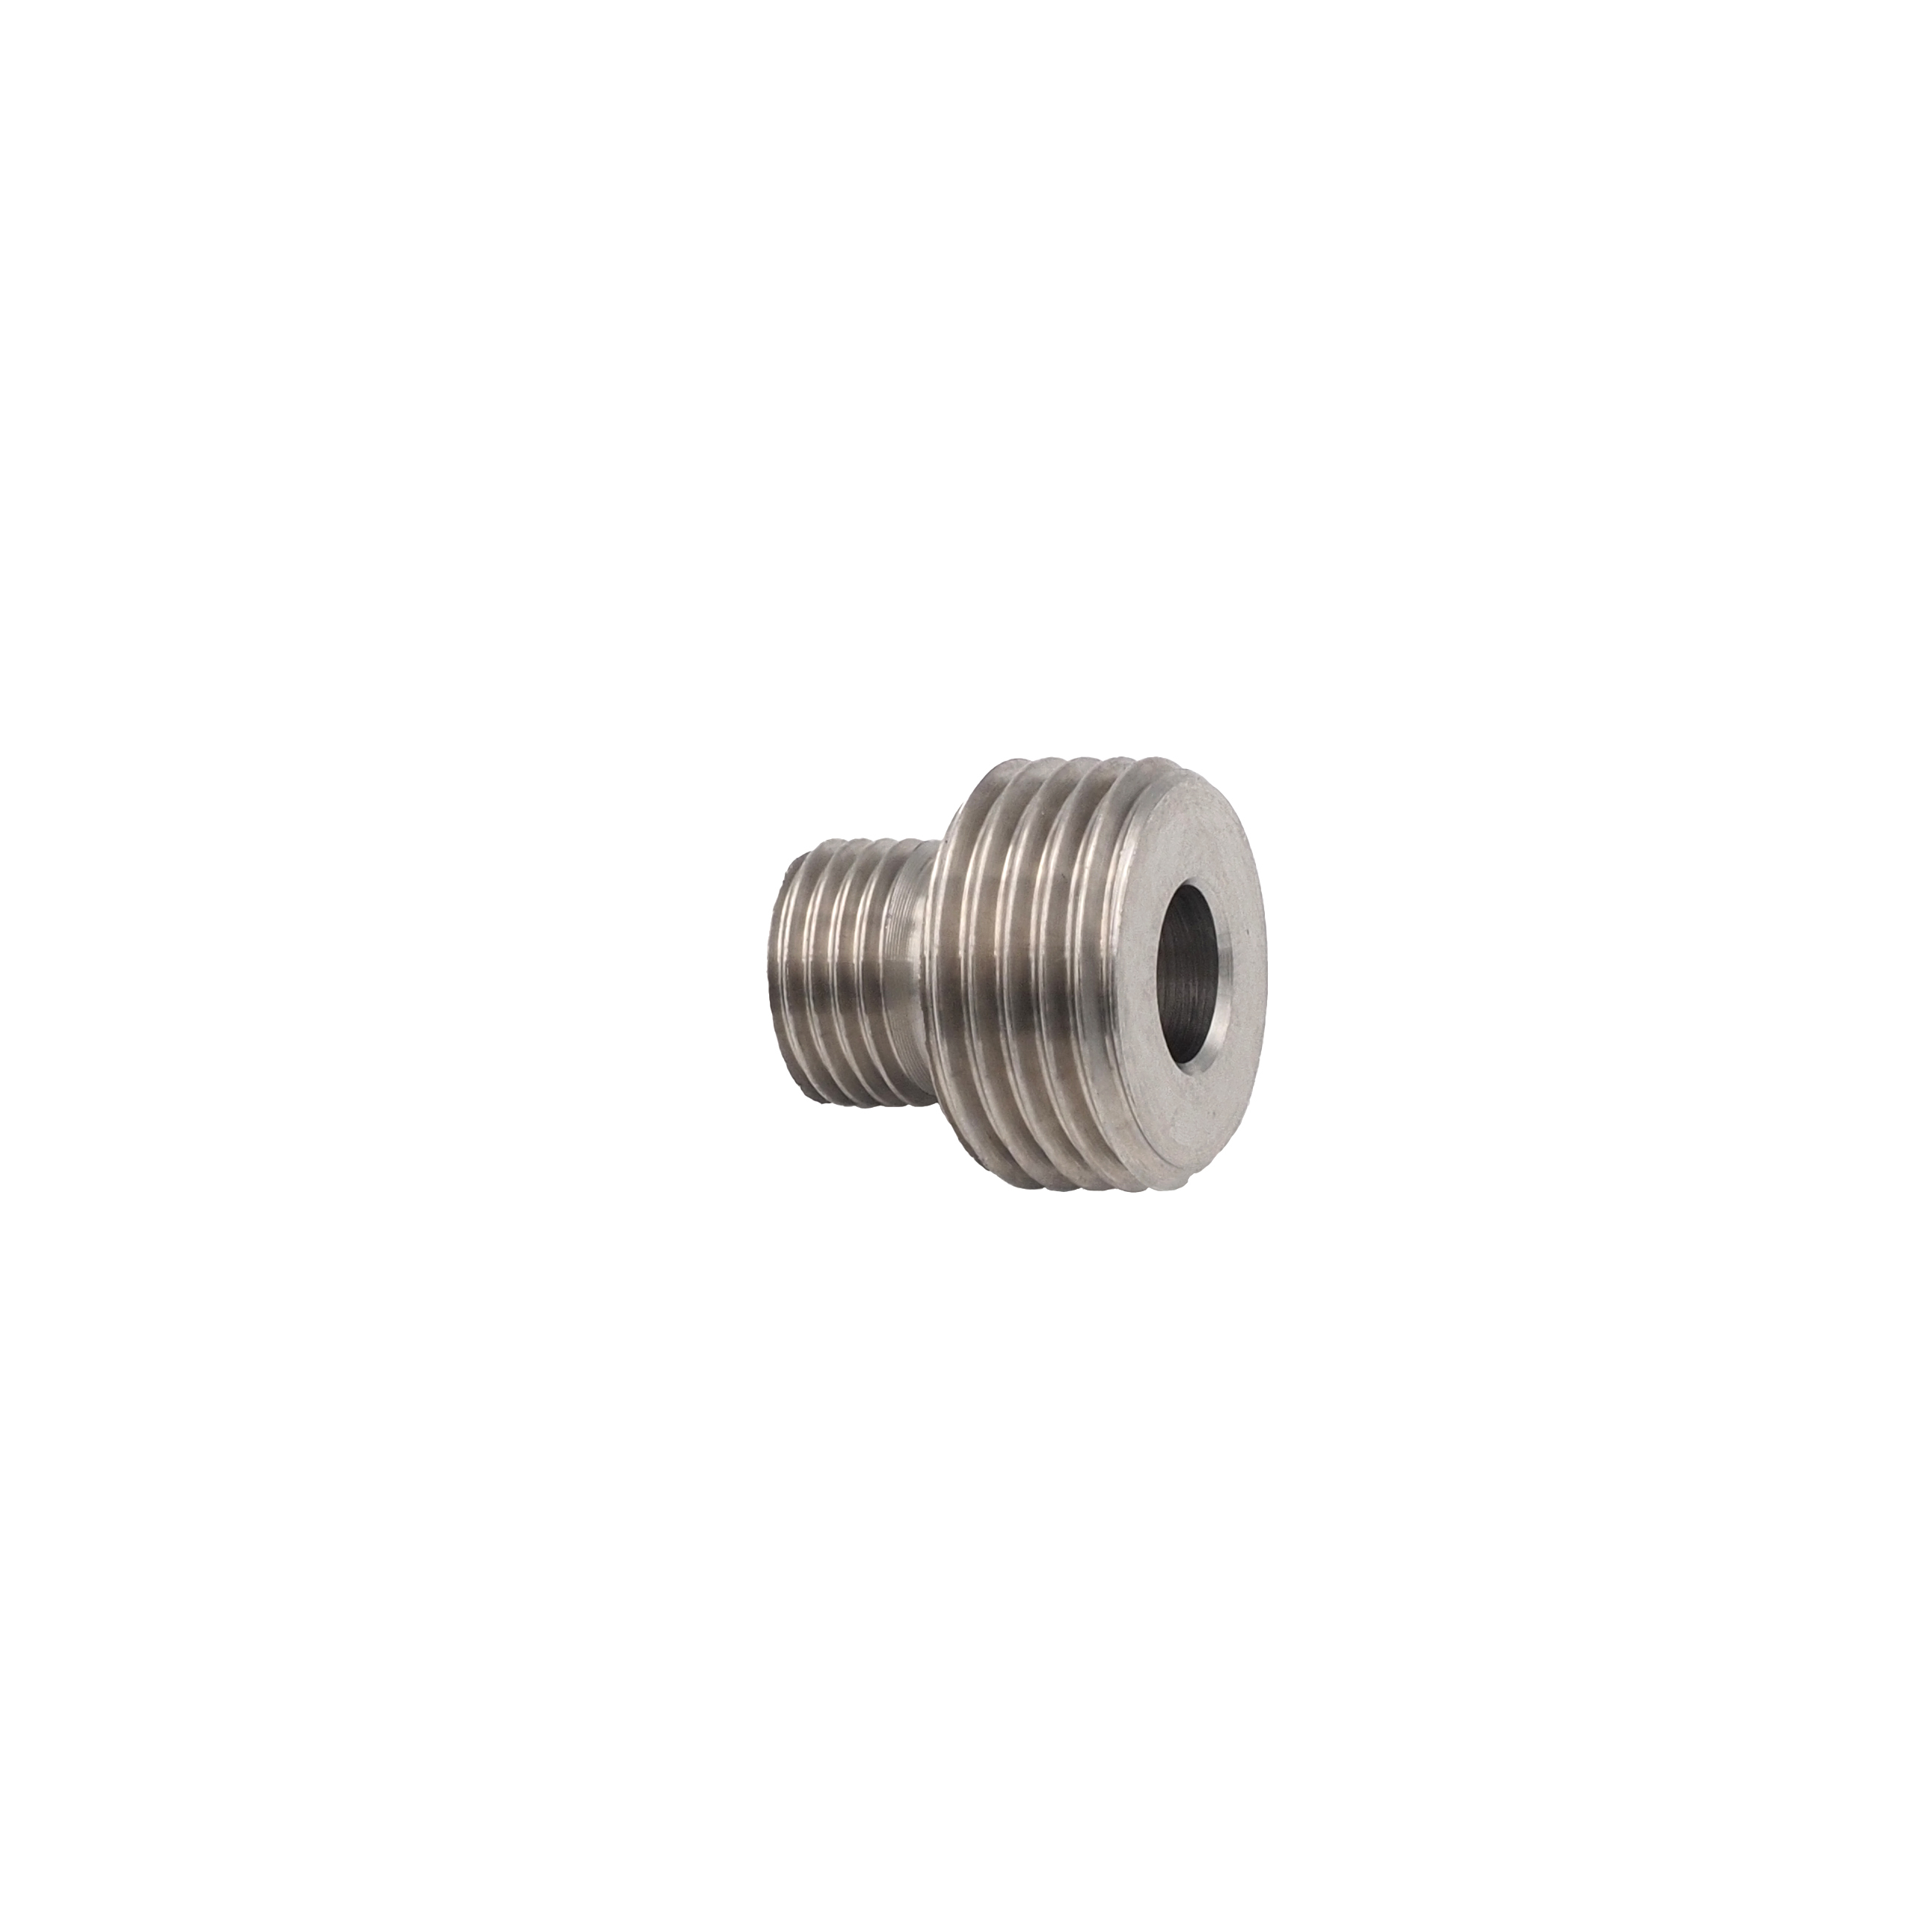 Double nipple stainless steel 1/4" - 1/2"